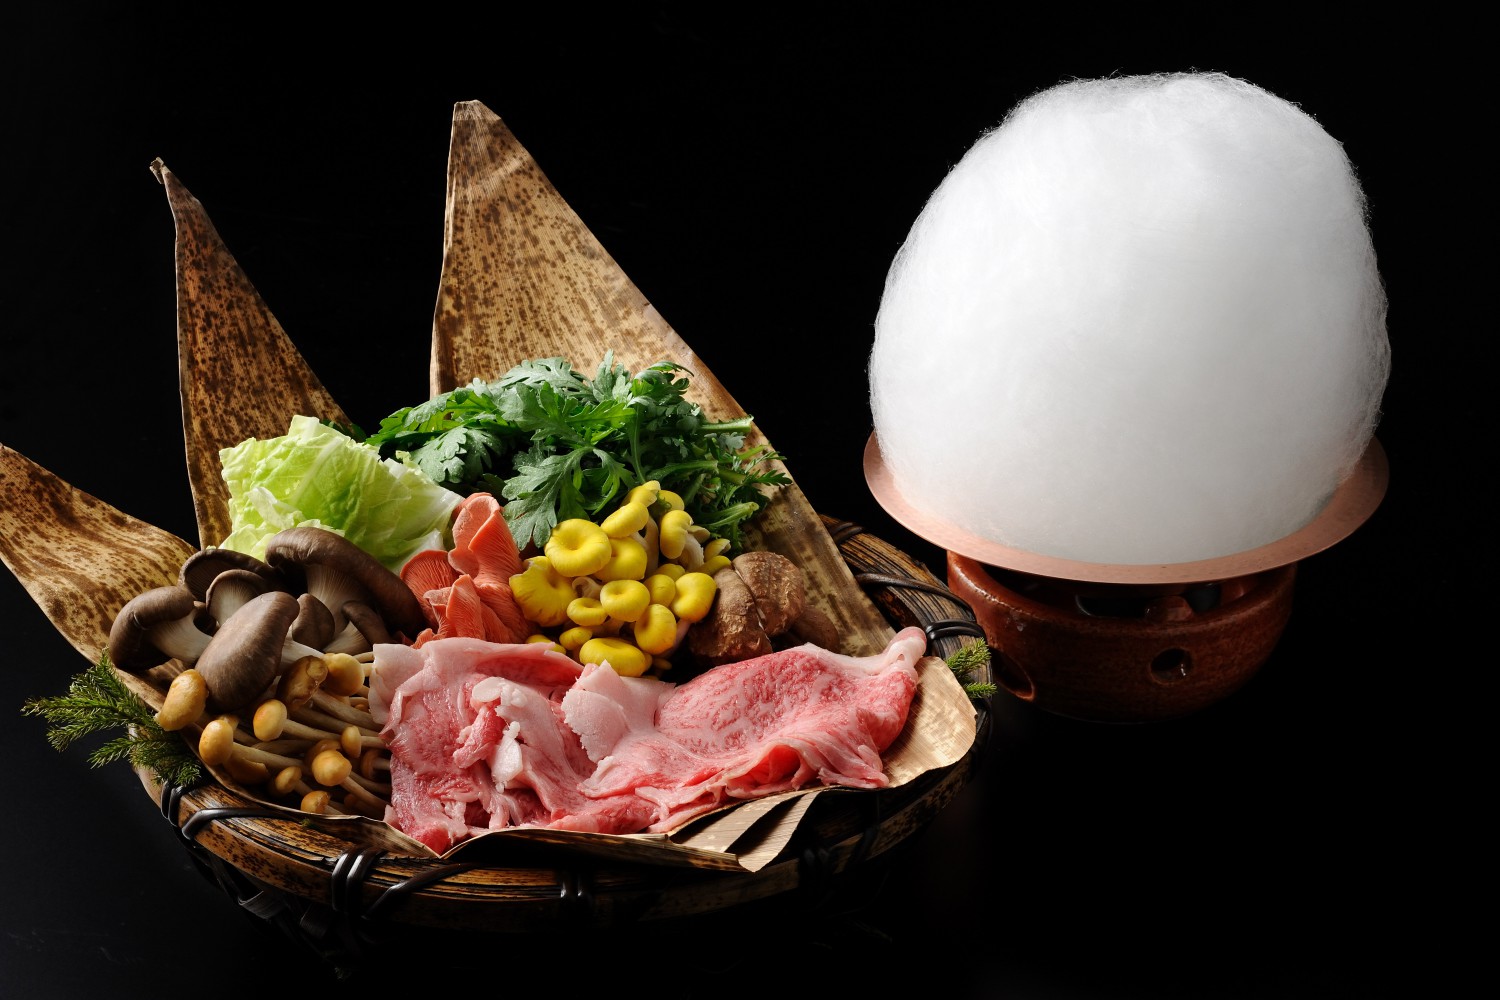 ▲ Supper: Yukinabe Kaiseki A Japanese kaiseki meal inspired by the melting of snow in the Alps."Sukiyaki hot pot" where cotton candy piled on a hot pot is melted under a warishita and eaten.A specialty dish where you can enjoy seasonal vegetables and meat.